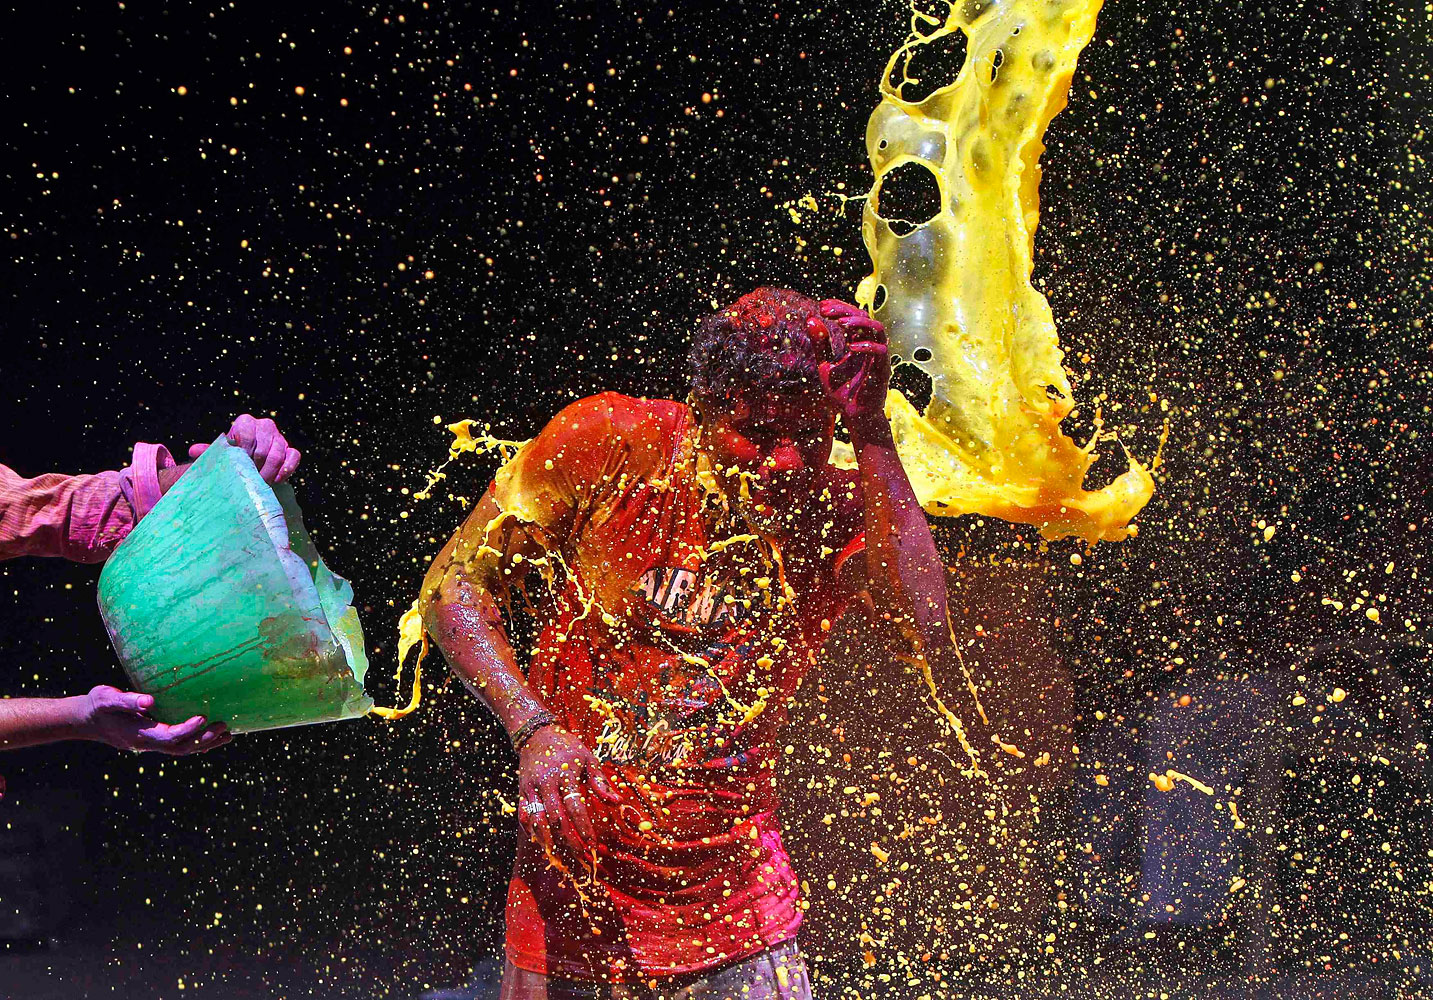 A man reacts to coloured water being splashed over him during Holi celebrations in the southern Indian city of Chennai, March 17, 2014.